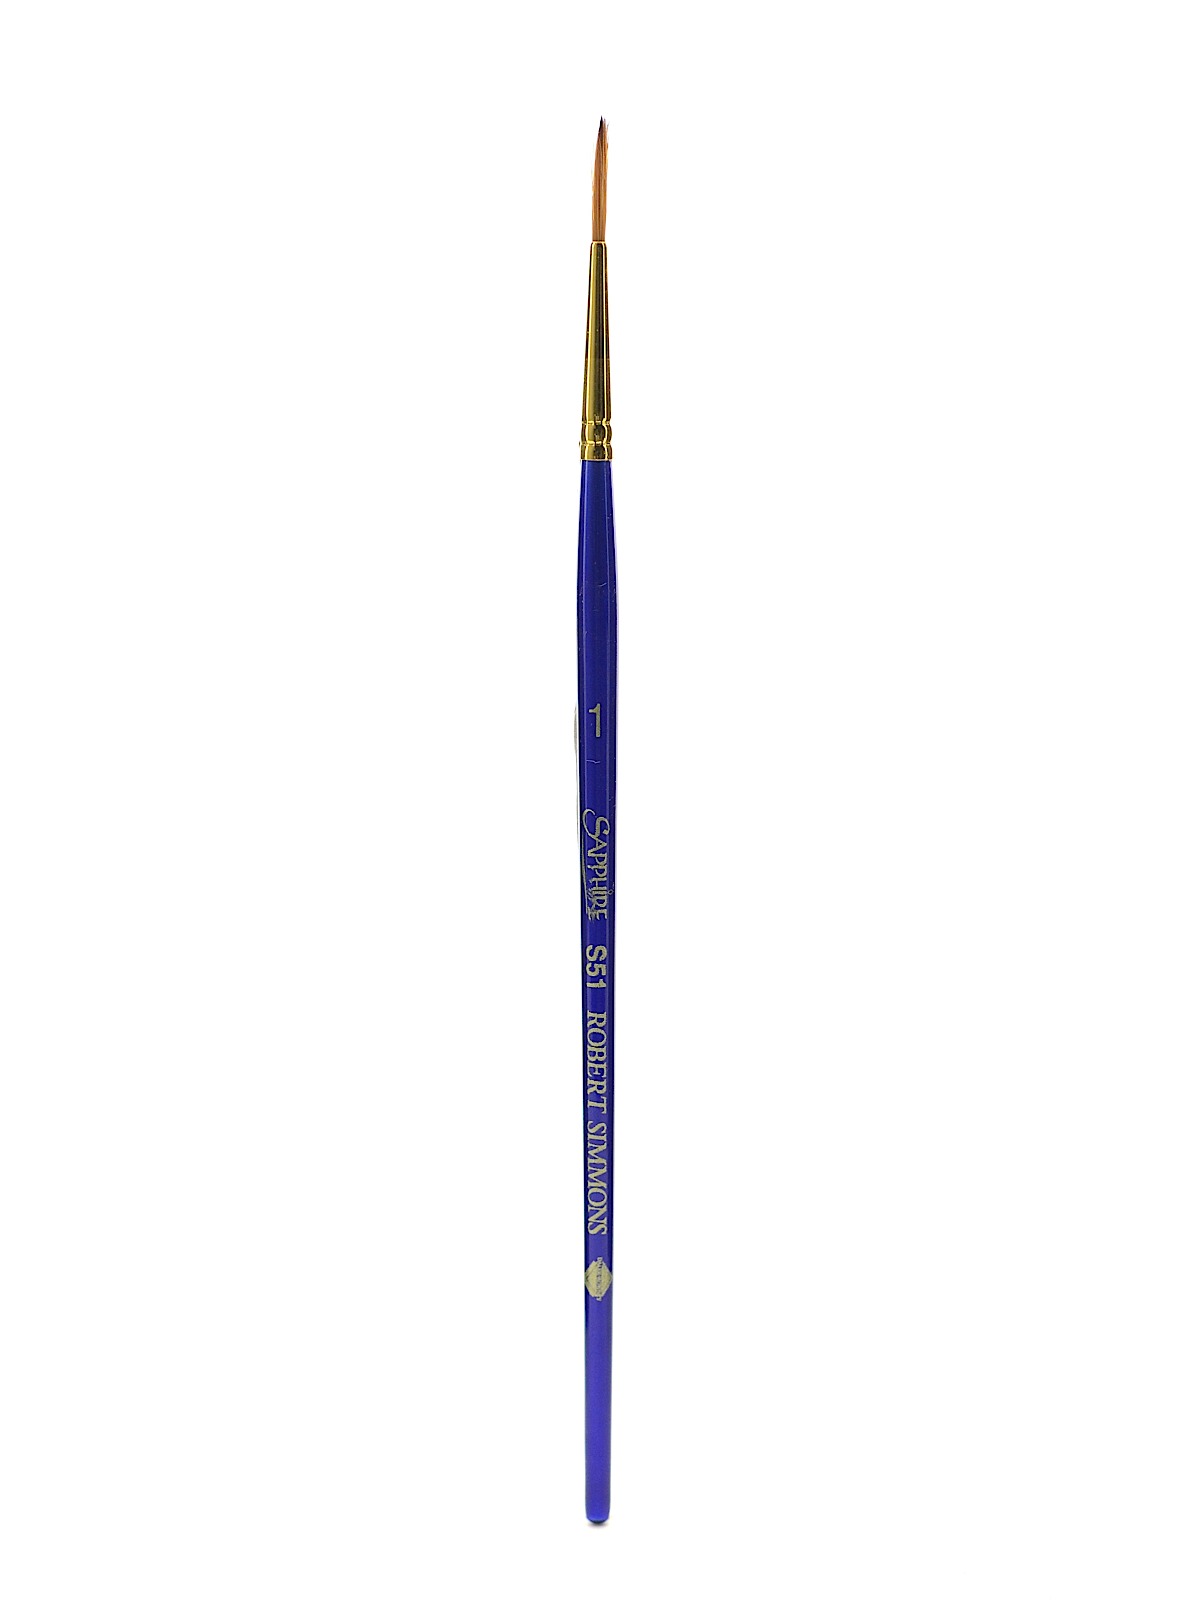 Sapphire Series Synthetic Brushes Short Handle 1 Liner S51